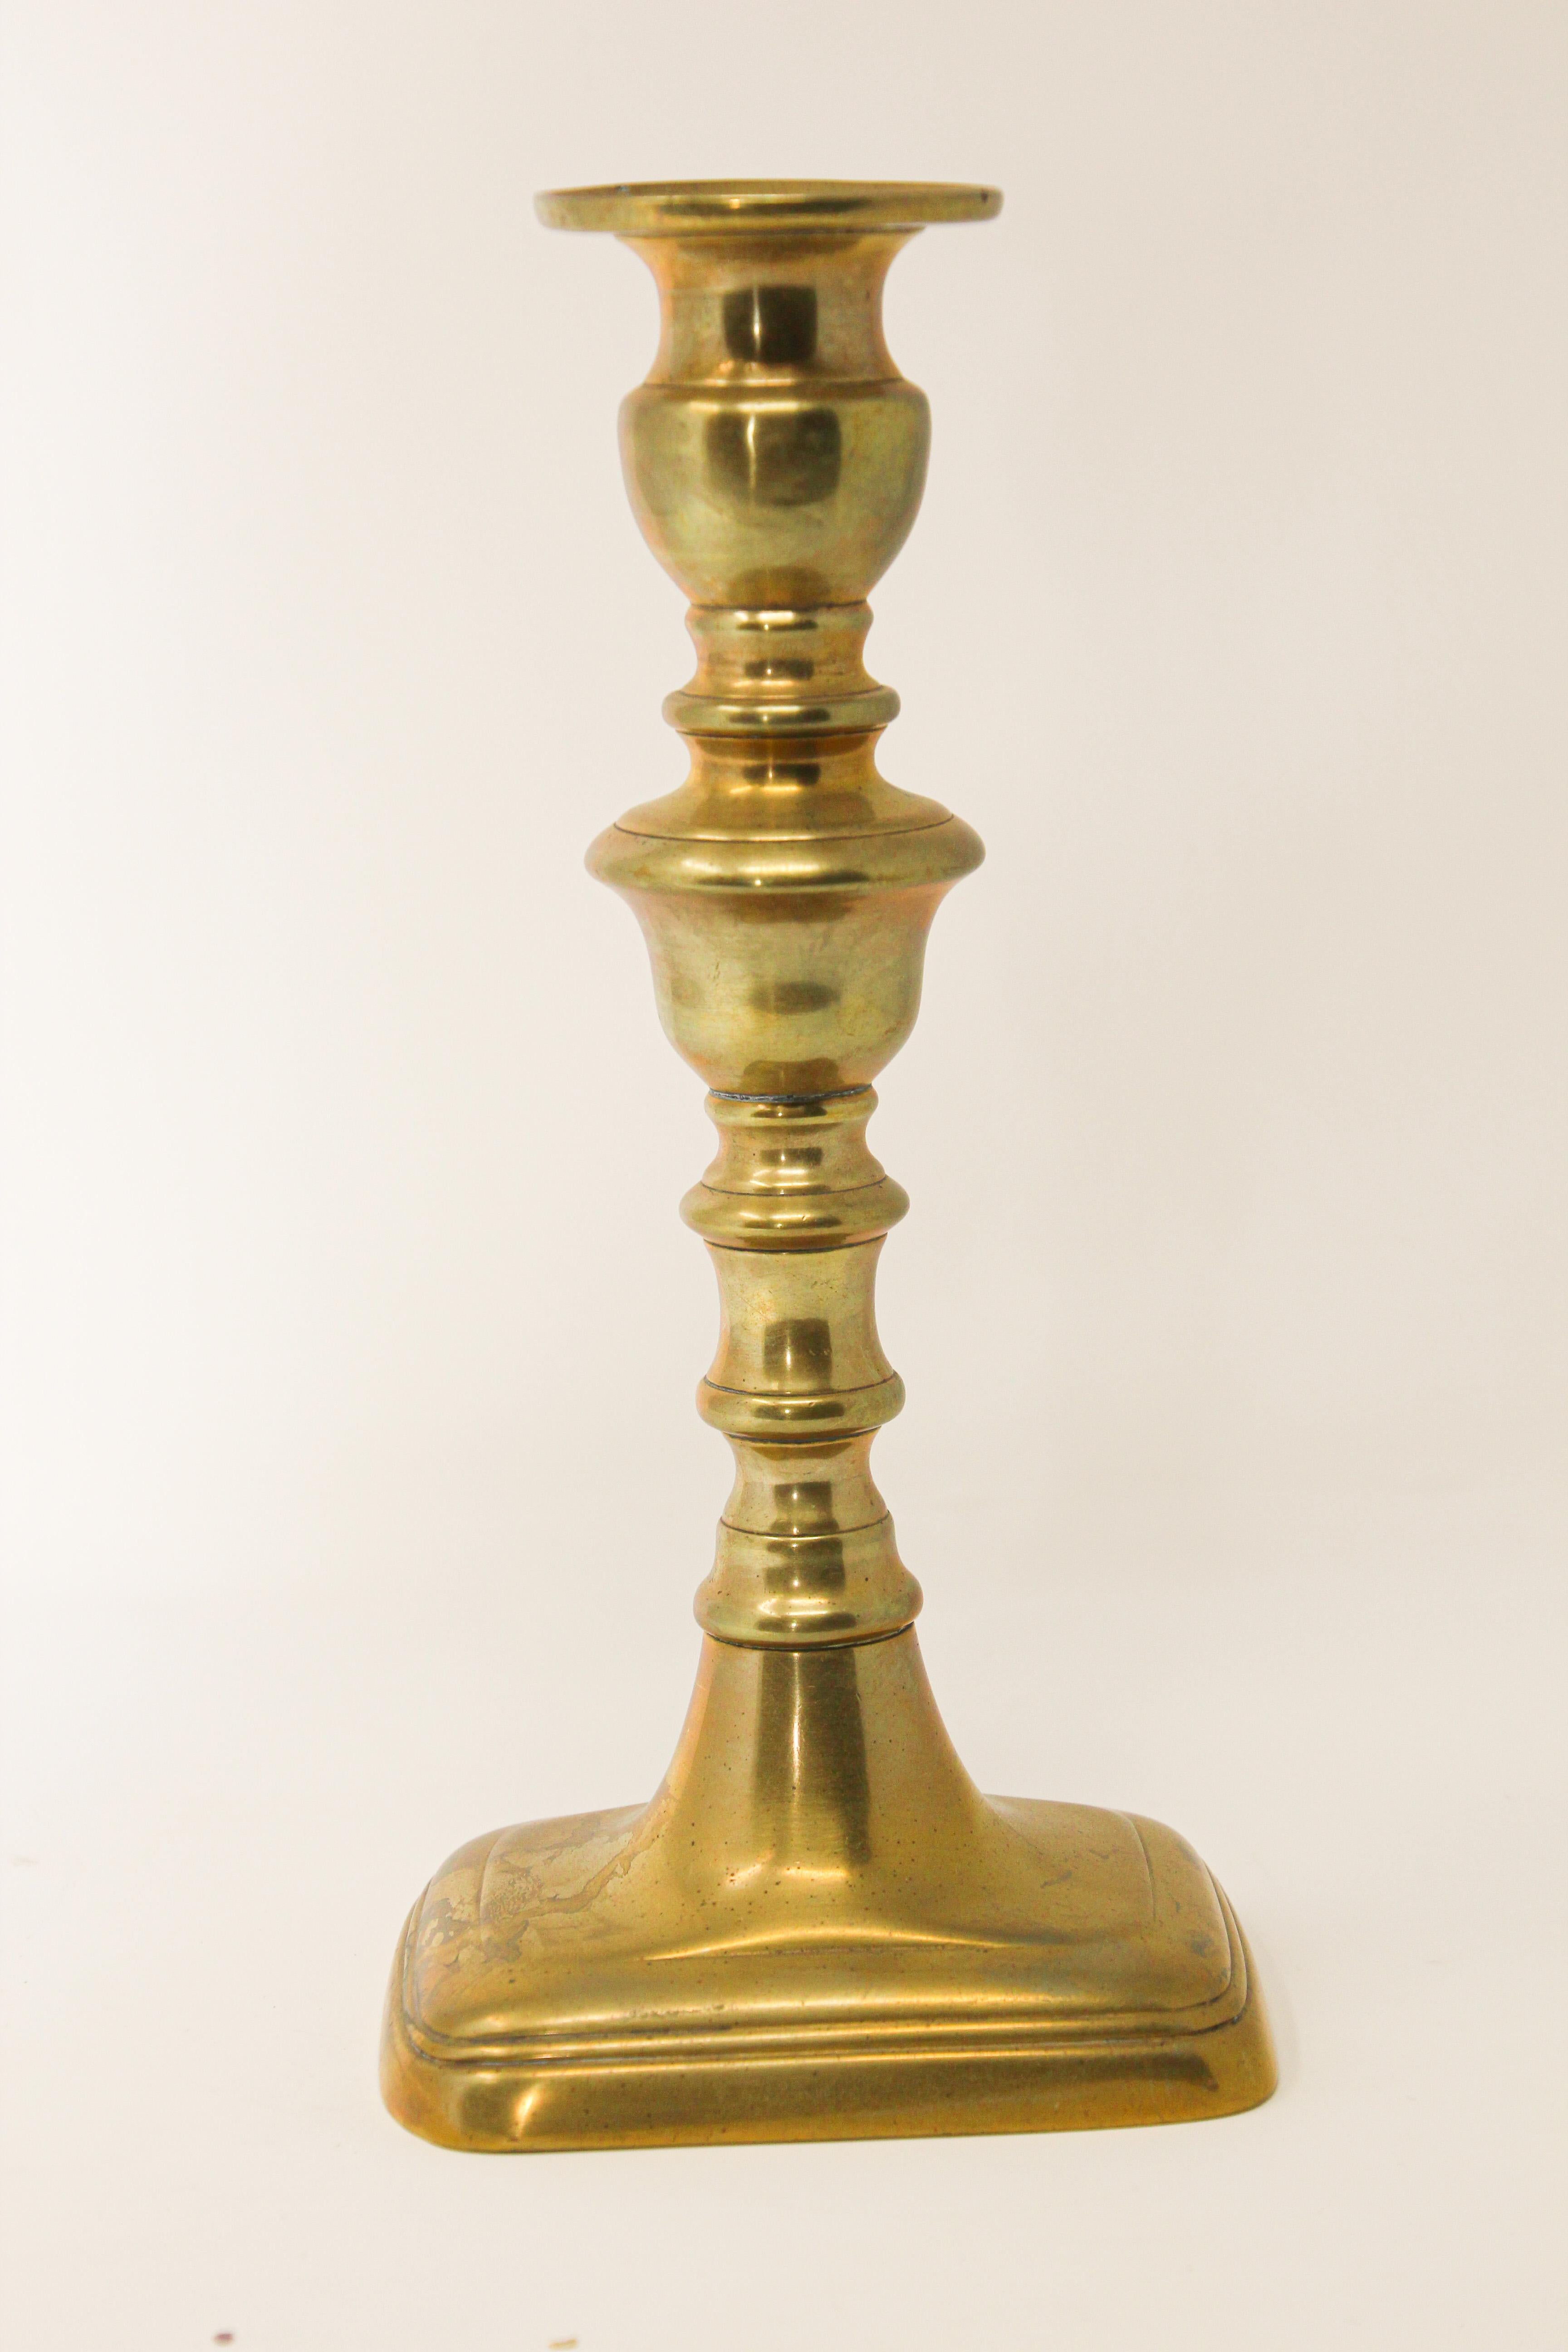 Victorian hand-tooled brass polished candlestick with a molded rectangular base.
Handcrafted Victorian brass candle stick, candleholder with push up.
Measures:
Base is 3.5